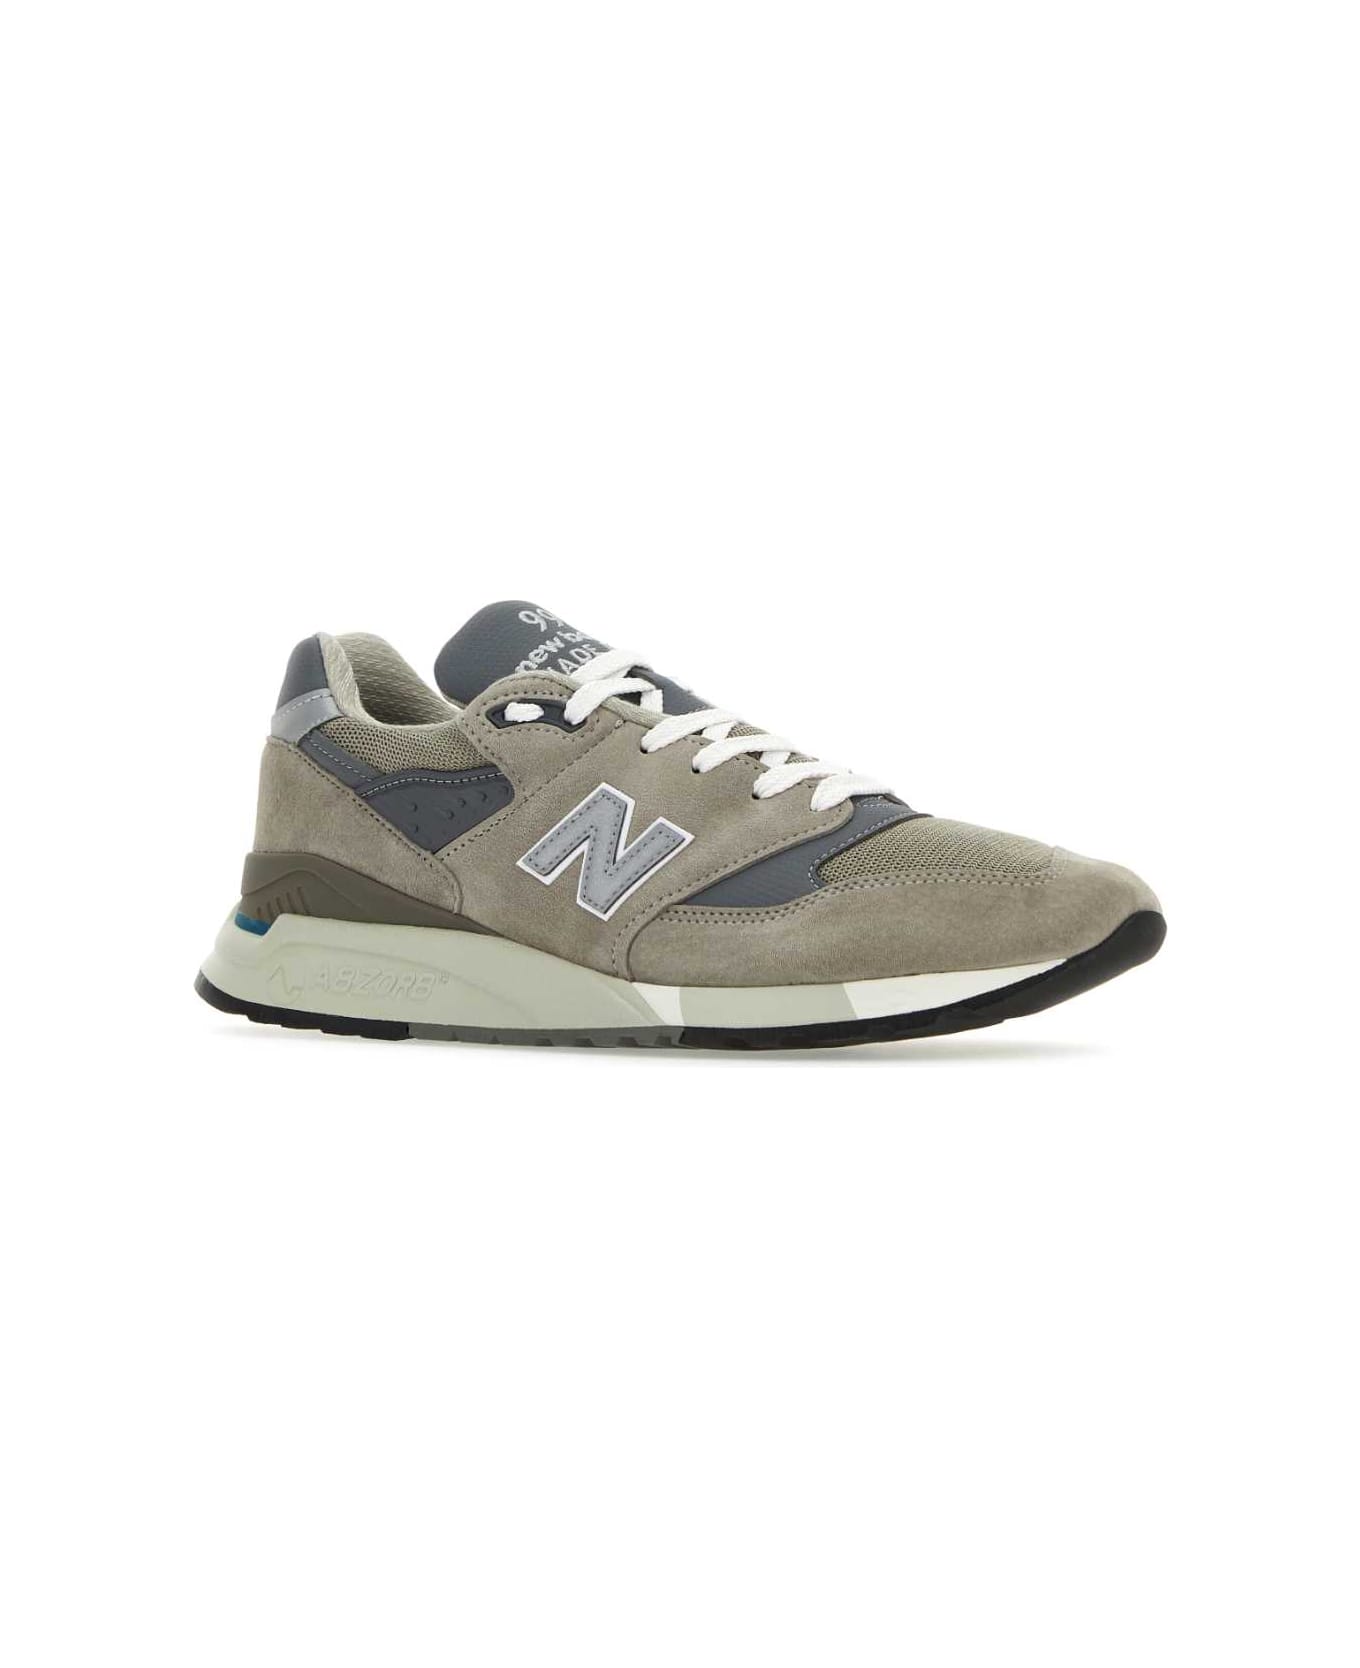 New Balance Multicolor Suede And Fabric U998gr Sneakers - GREY